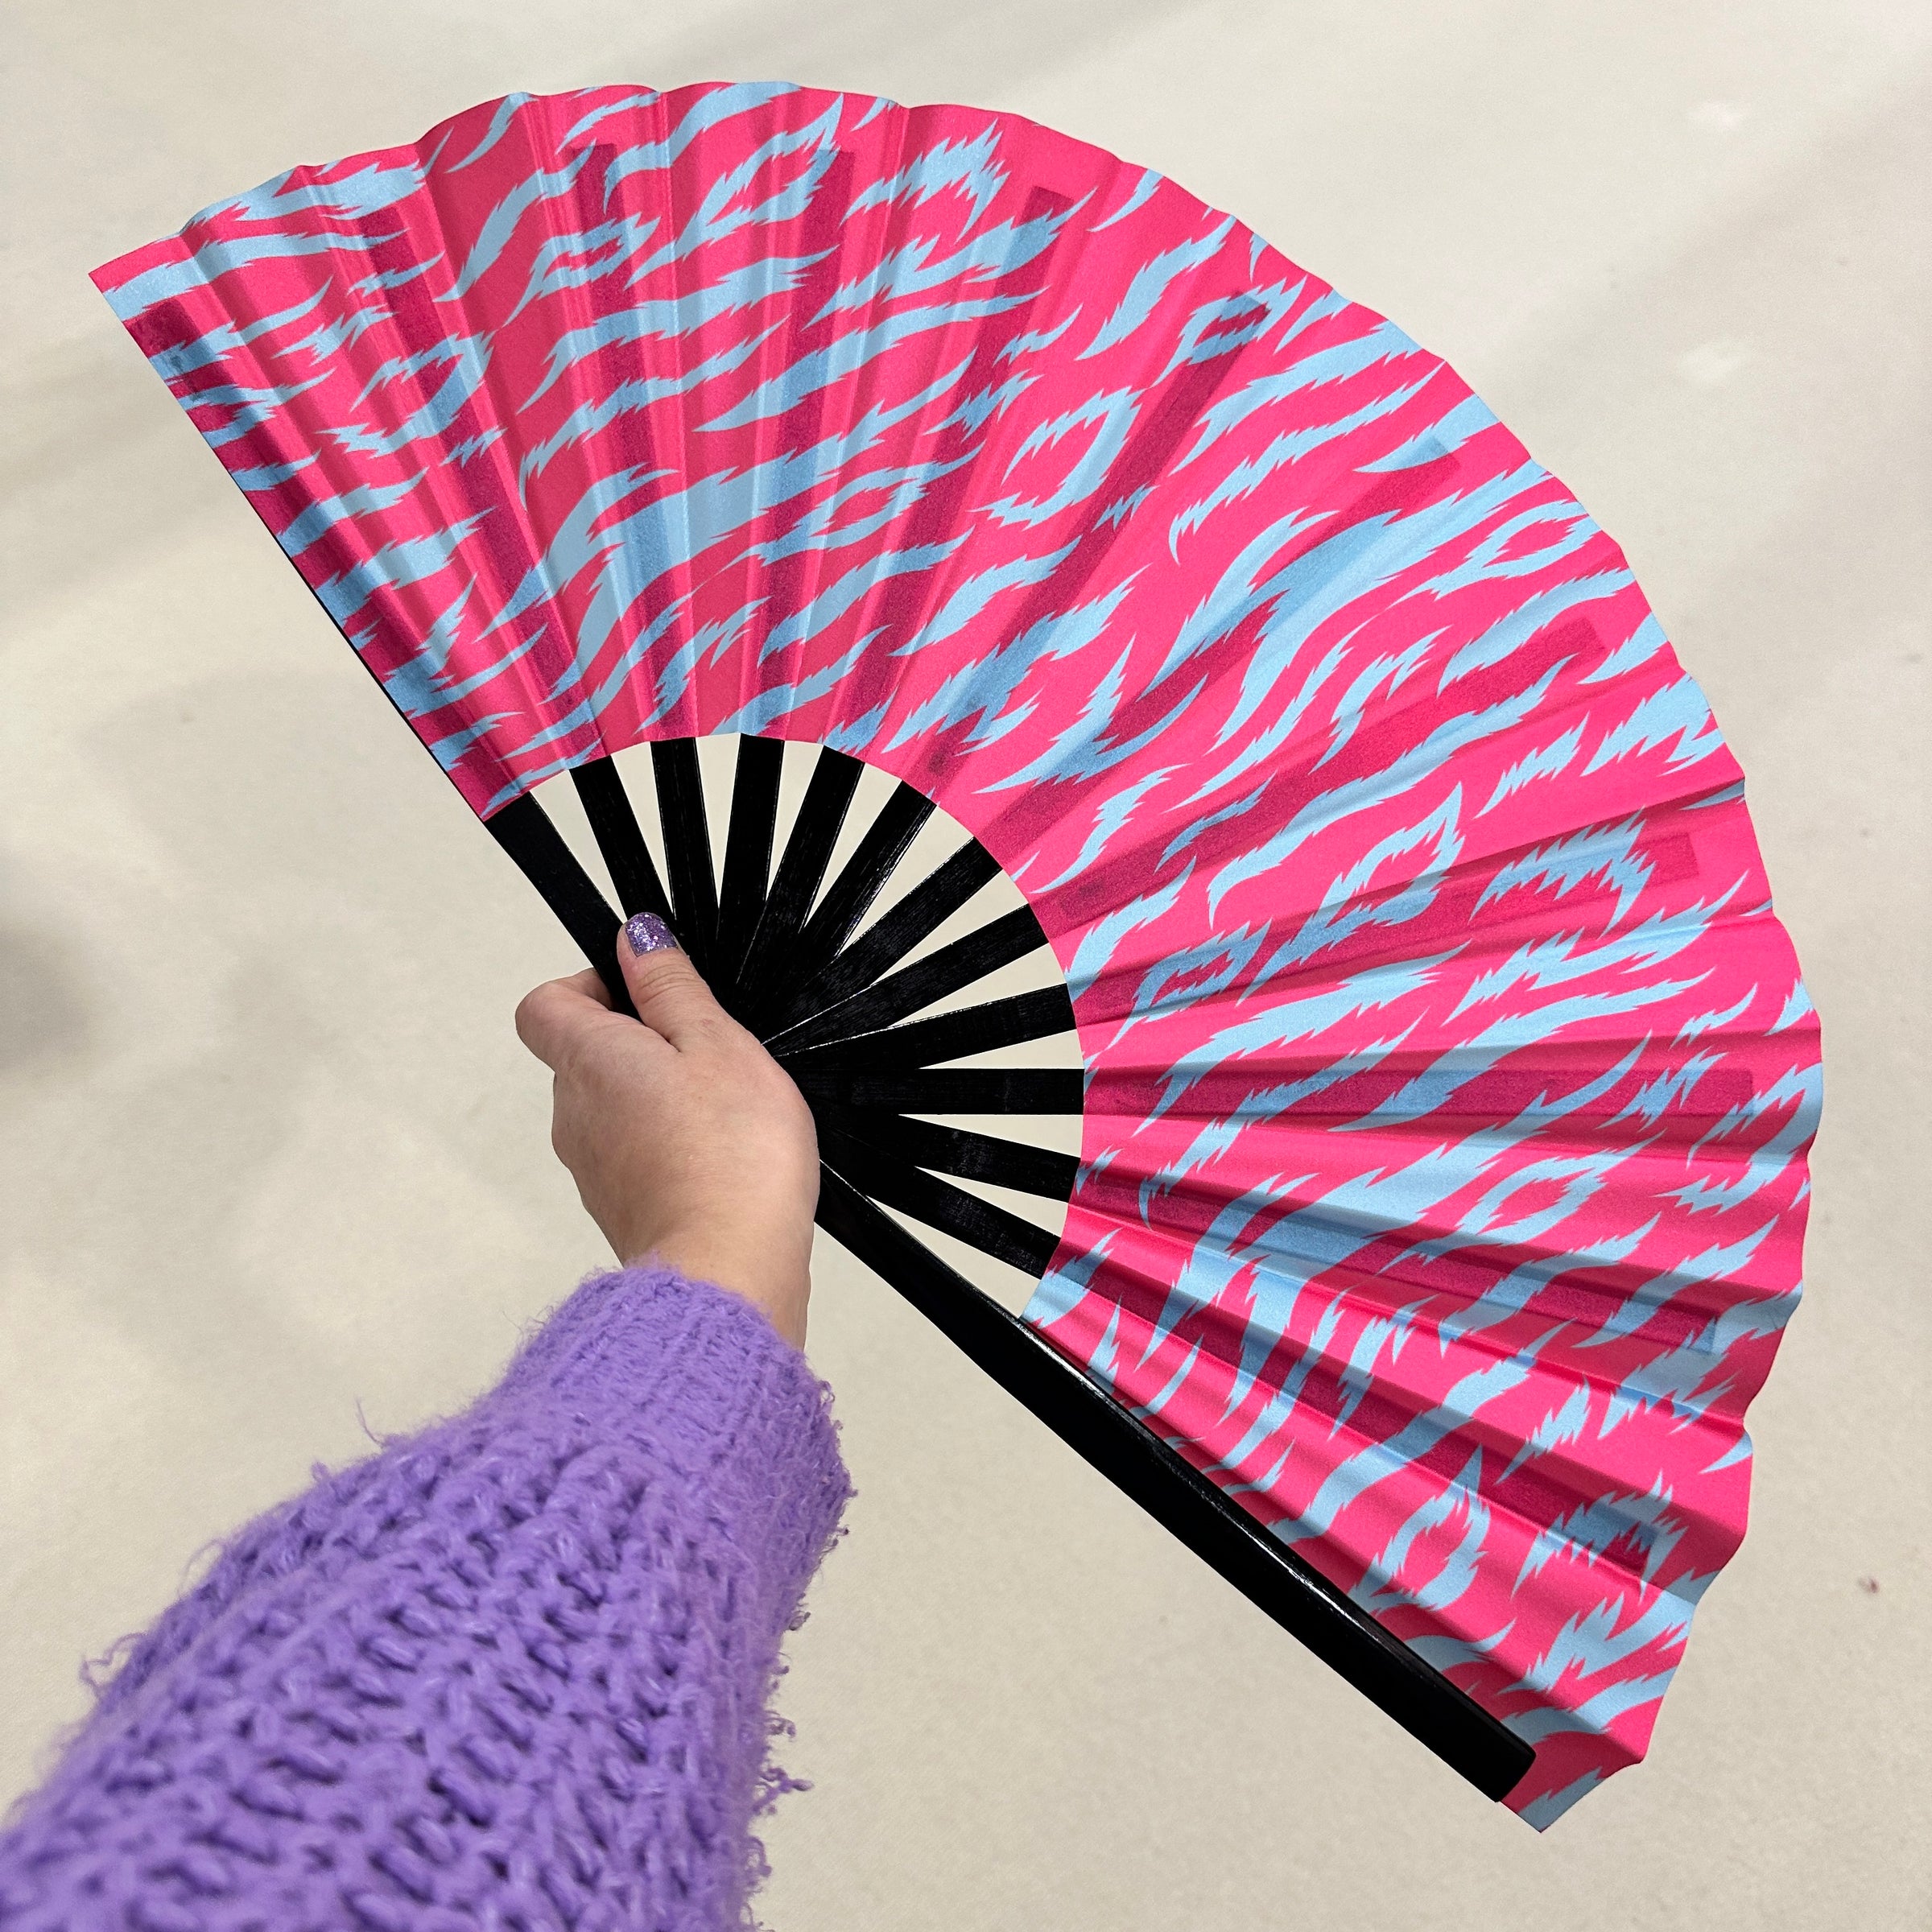 Giant Clacking Hand Fan with Pink & Blue Tiger Animal Print (Glows in UV!)